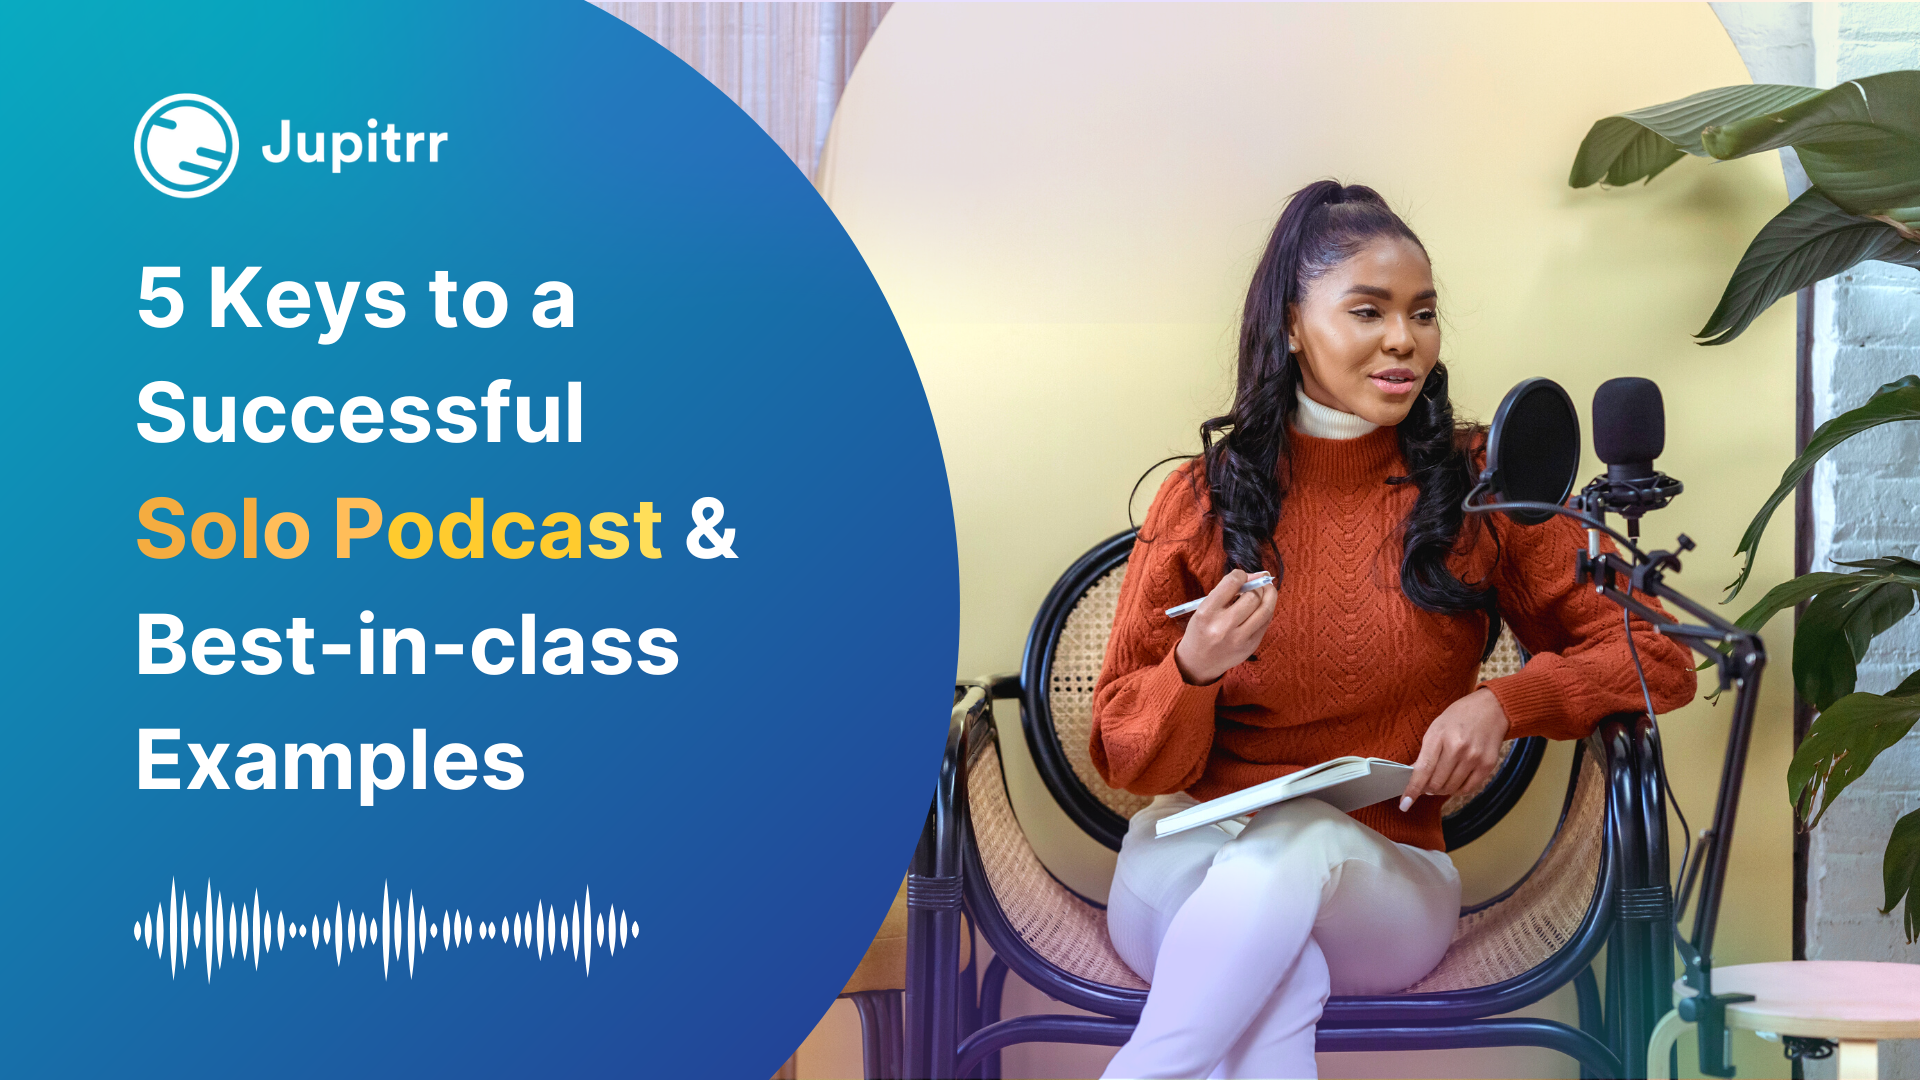 5 Keys to a Successful Solo Podcast & Best-in-class Examples